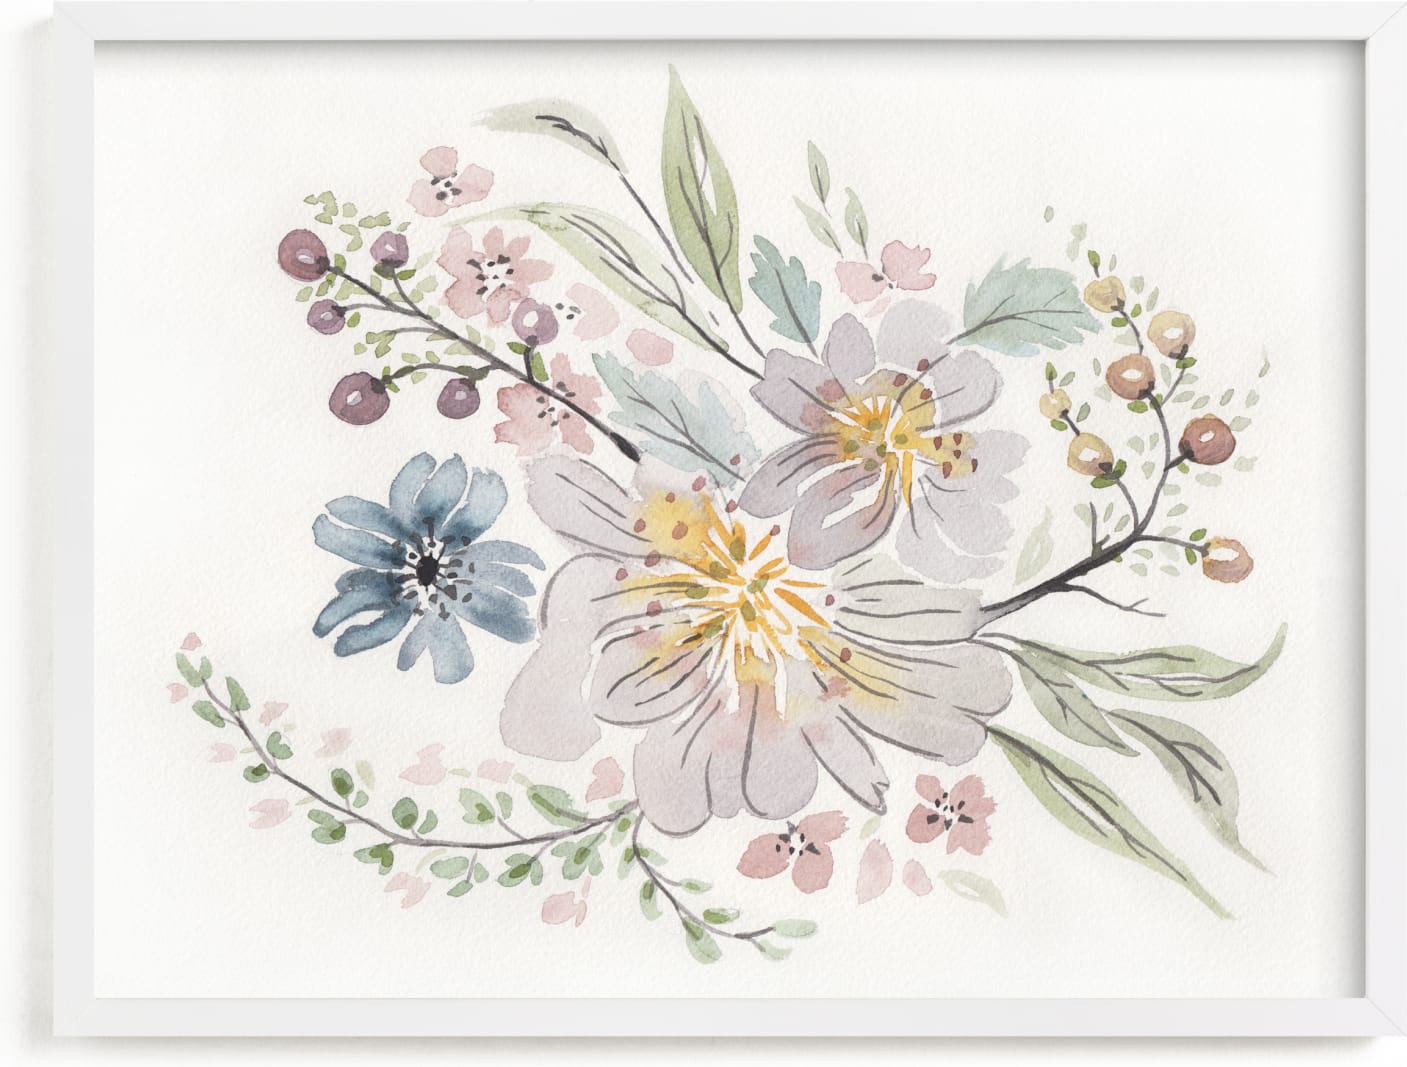 This is a grey nursery wall art by Becky Nimoy called Muted Watercolor Bouquet.